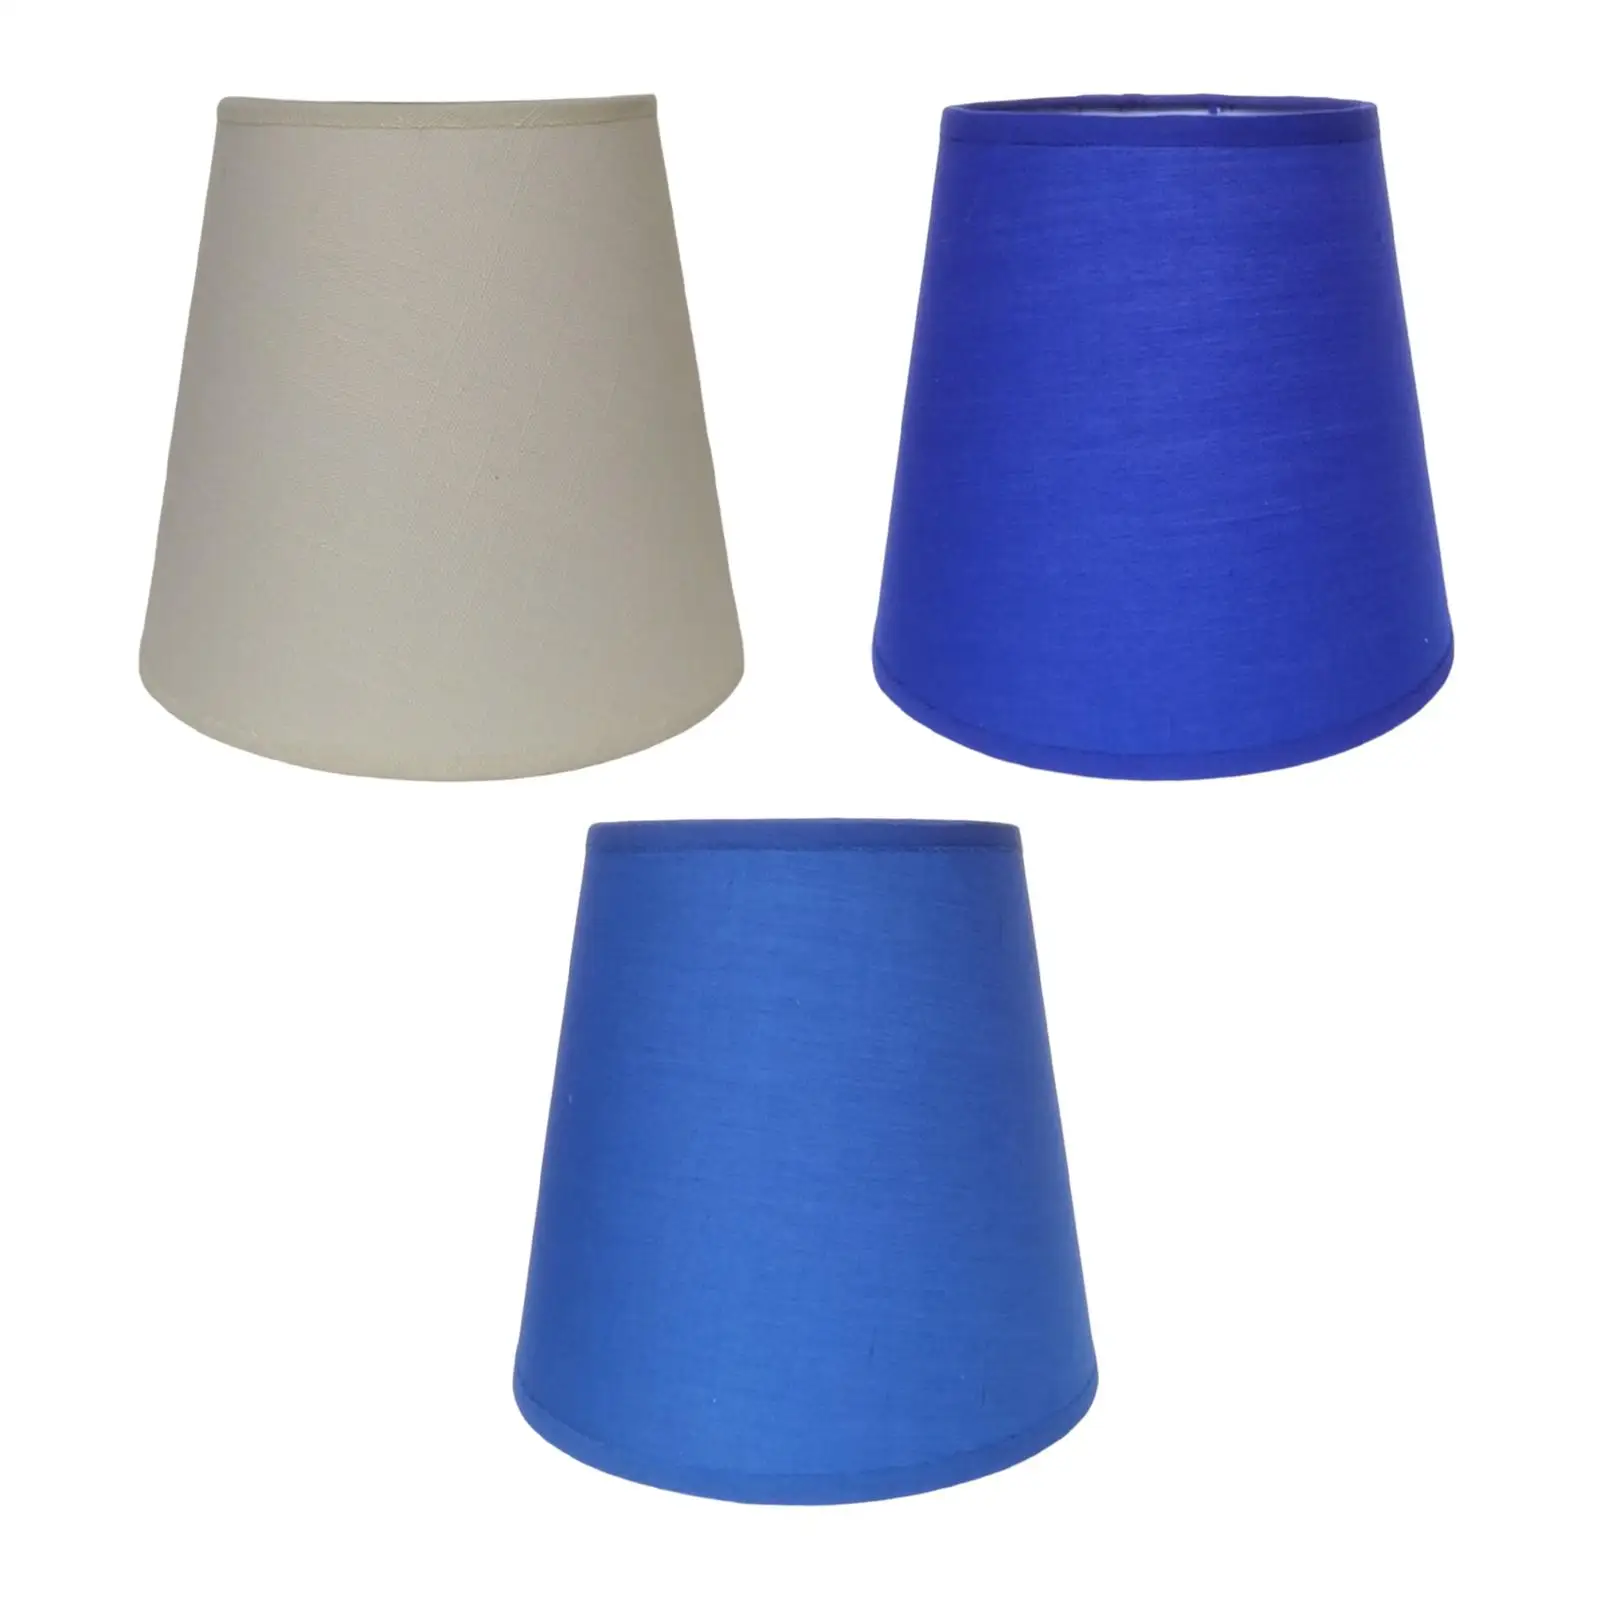 for E27 Socket Fabric Lampshade Practical Hanging Light Cover Table Lamp Floor